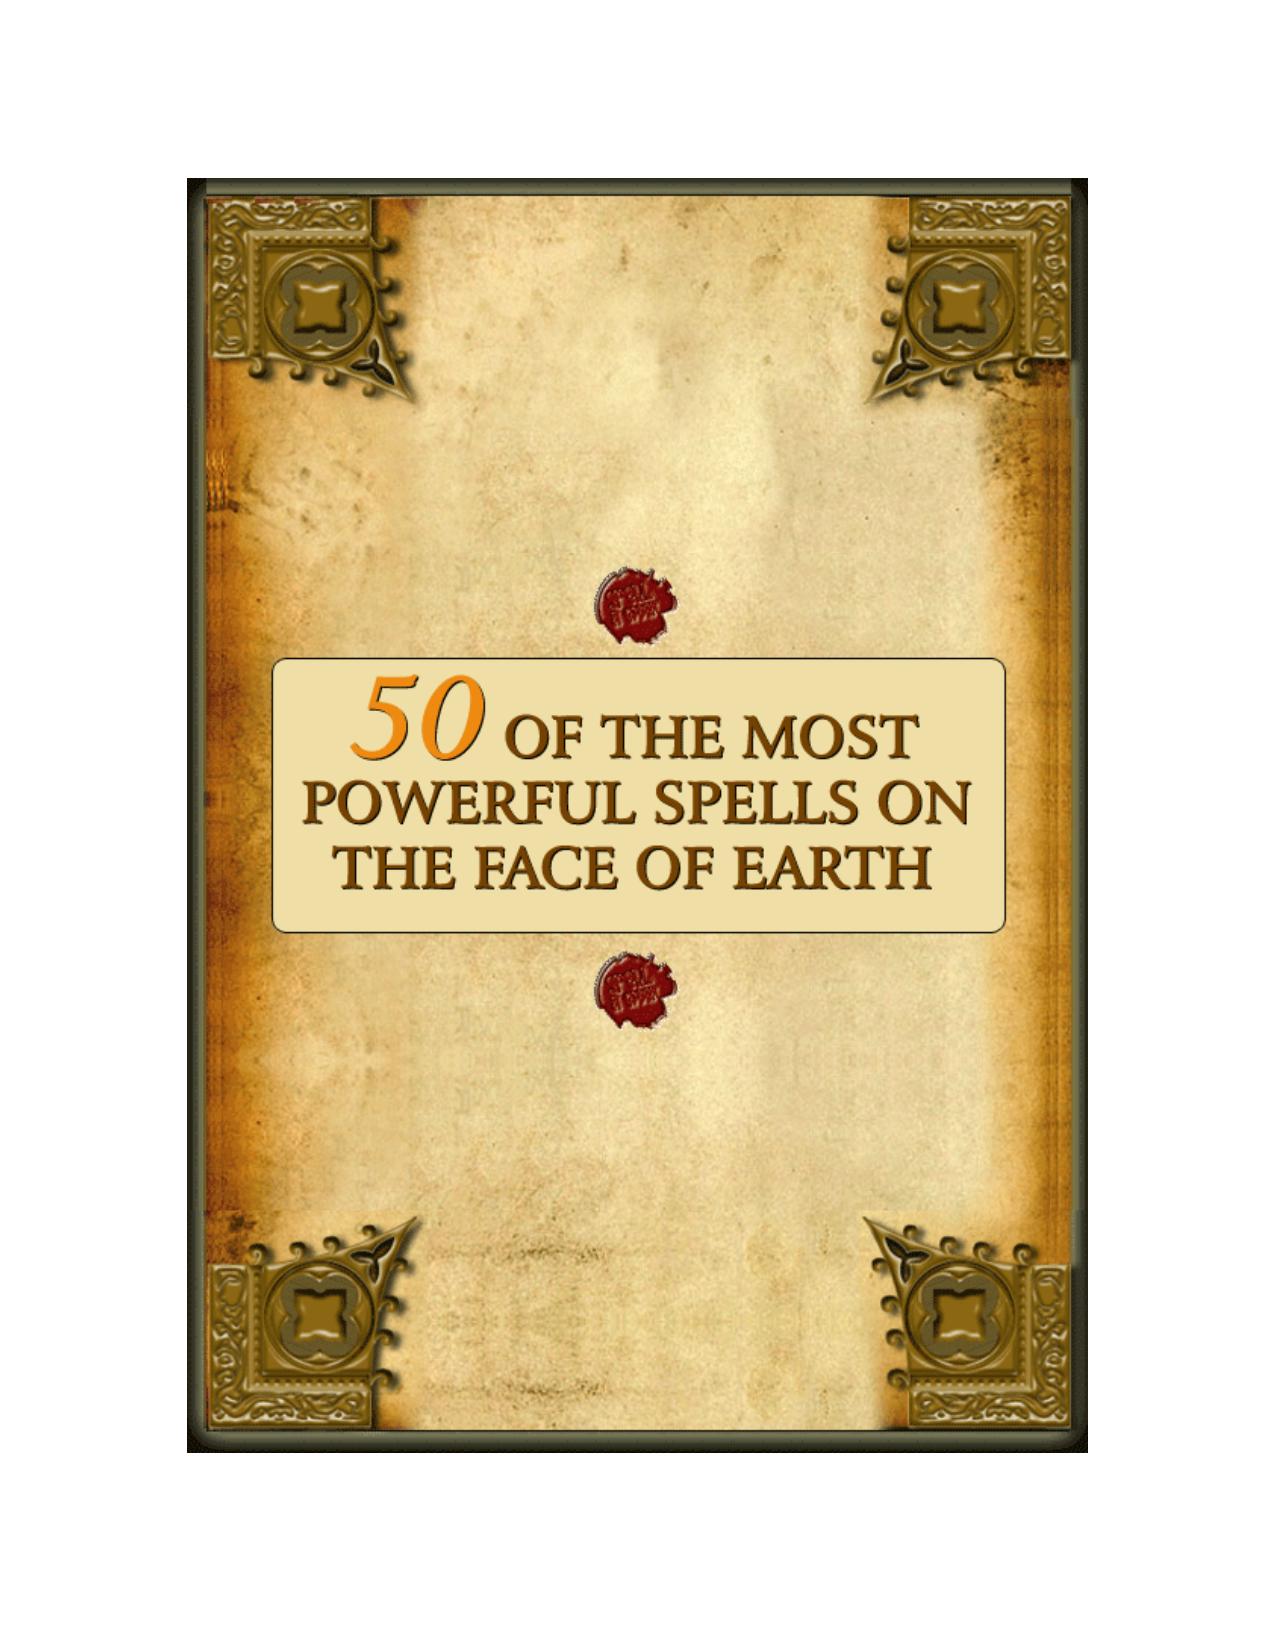 50 of the most powerful spells on the face of the earth